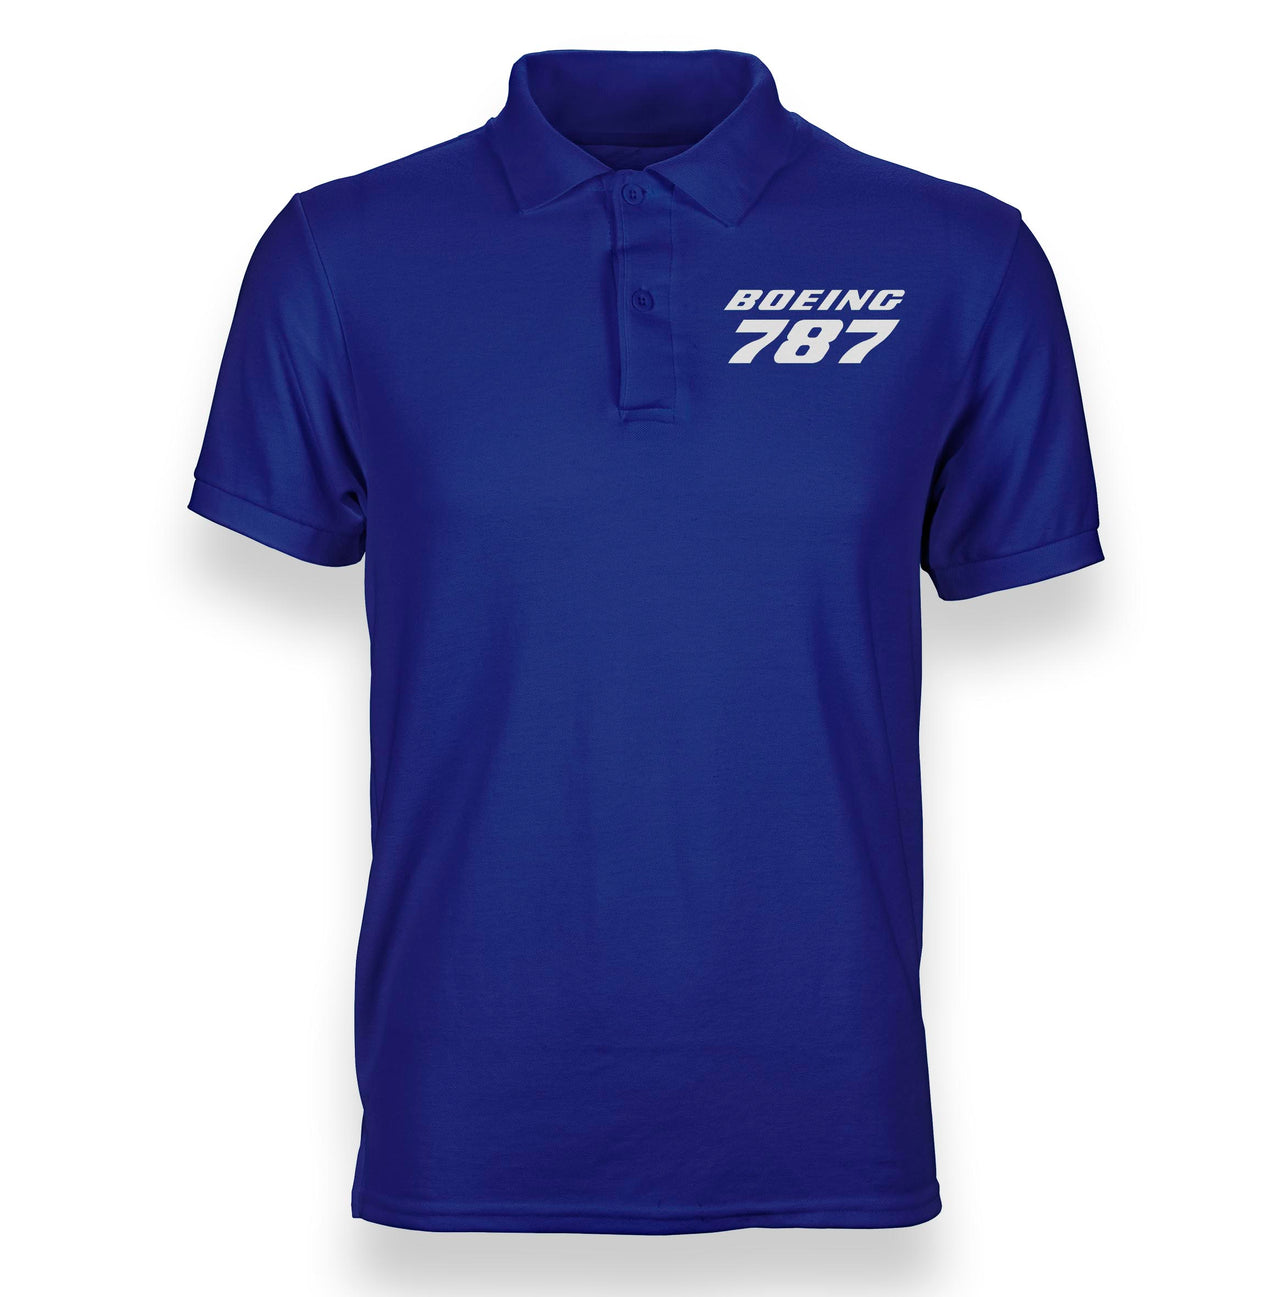 Boeing 787 & Text Designed Polo T-Shirts